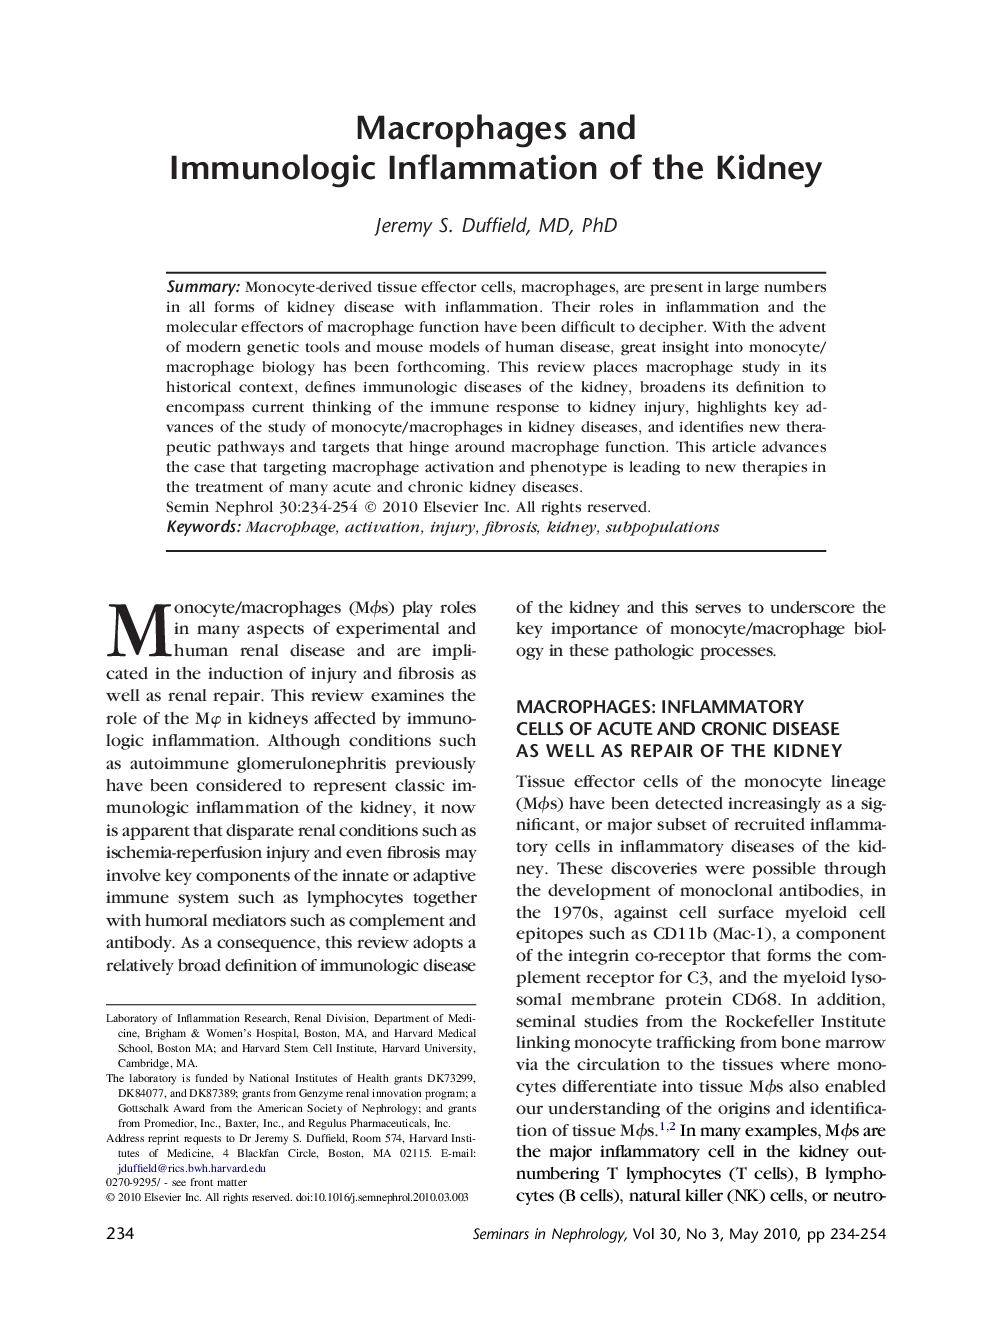 Macrophages and Immunologic Inflammation of the Kidney